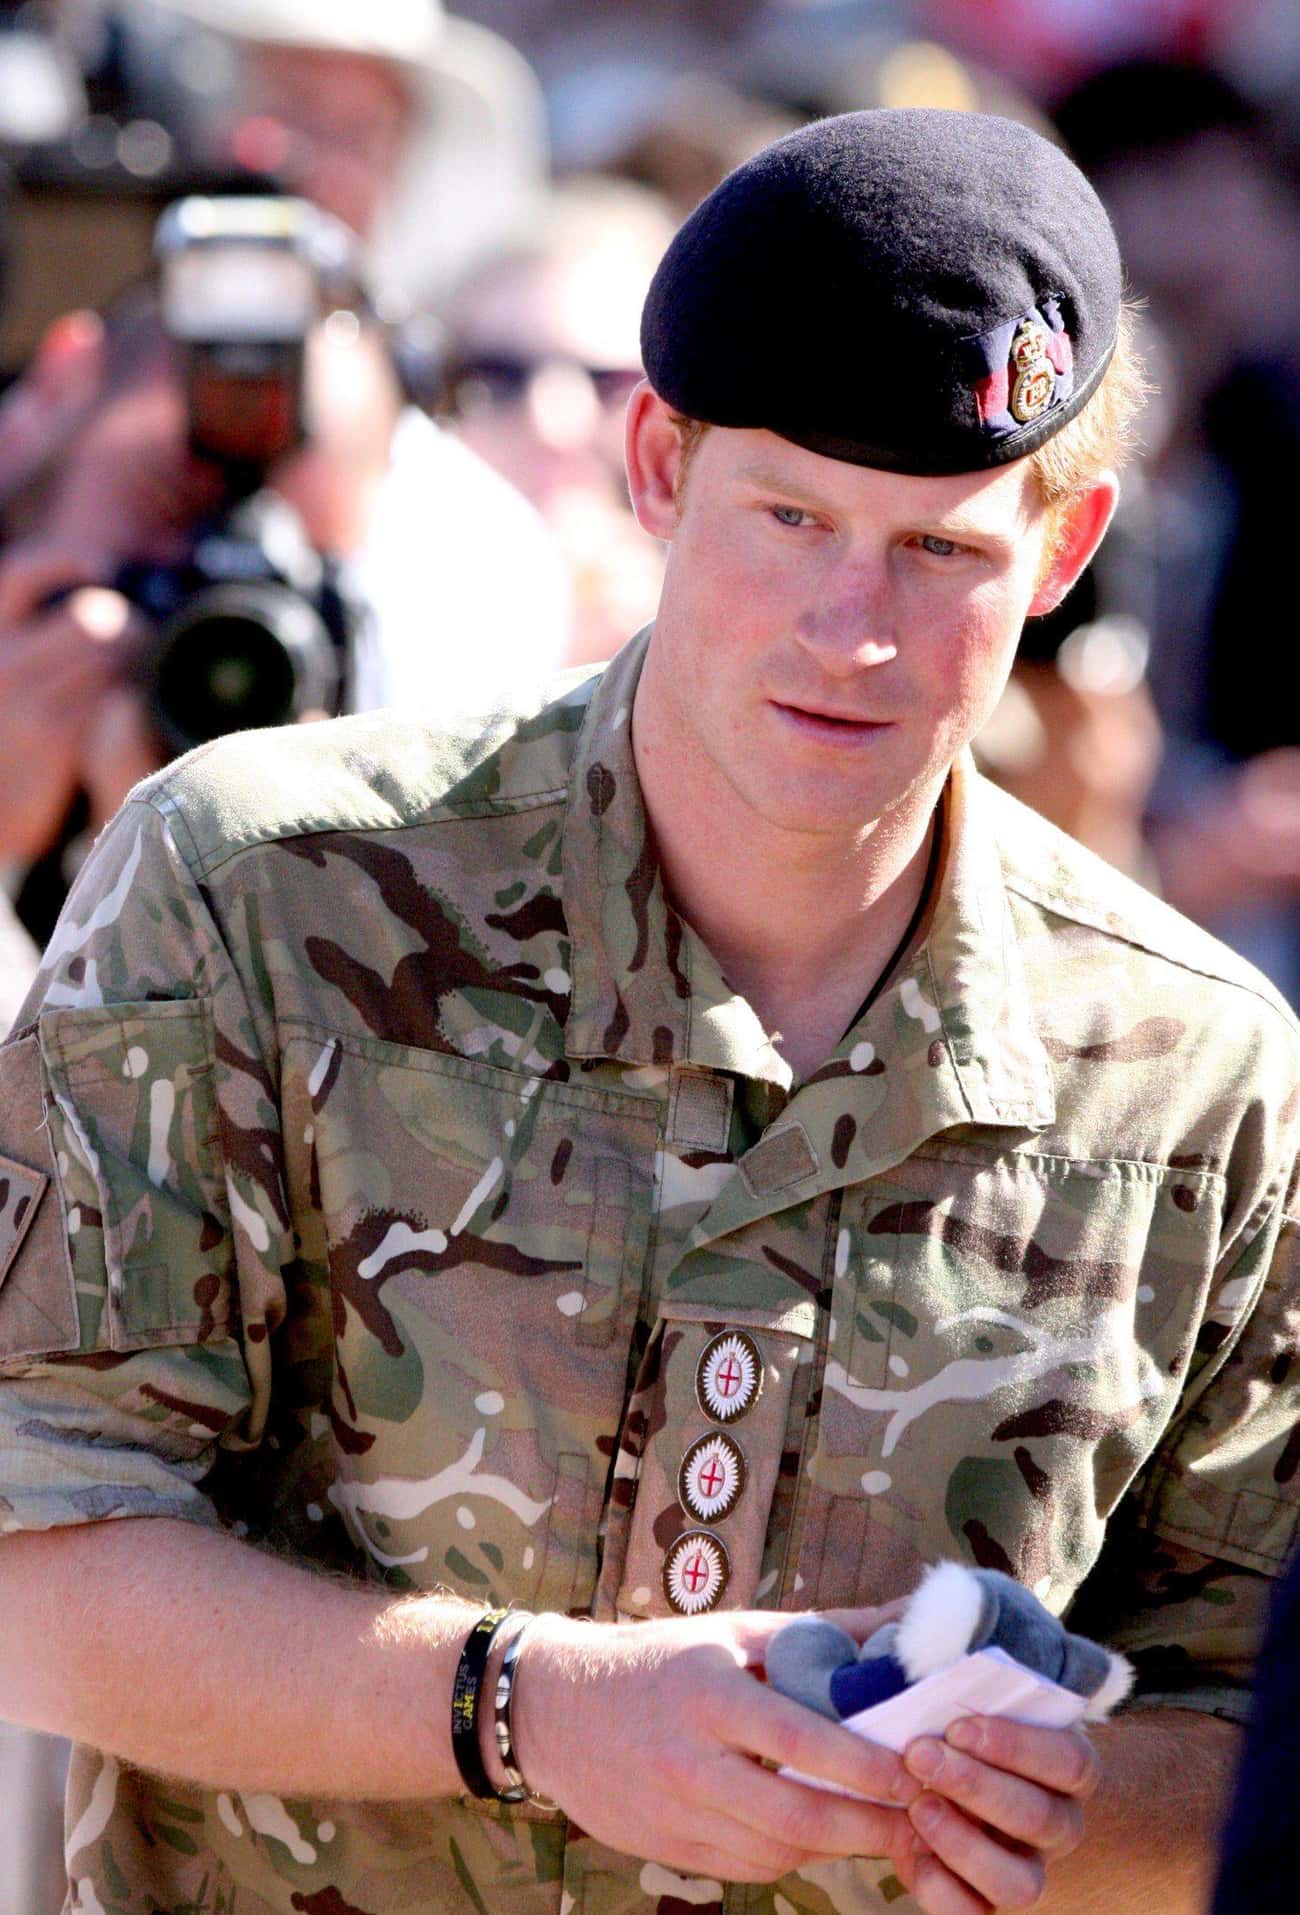 Prince Harry Felt That His Tours In Afghanistan Made Him Feel More Normal Than He Had Ever Felt Before,  and He Divulged That He Was Responsible For Taking The Lives Of 25 Members Of The Taliban